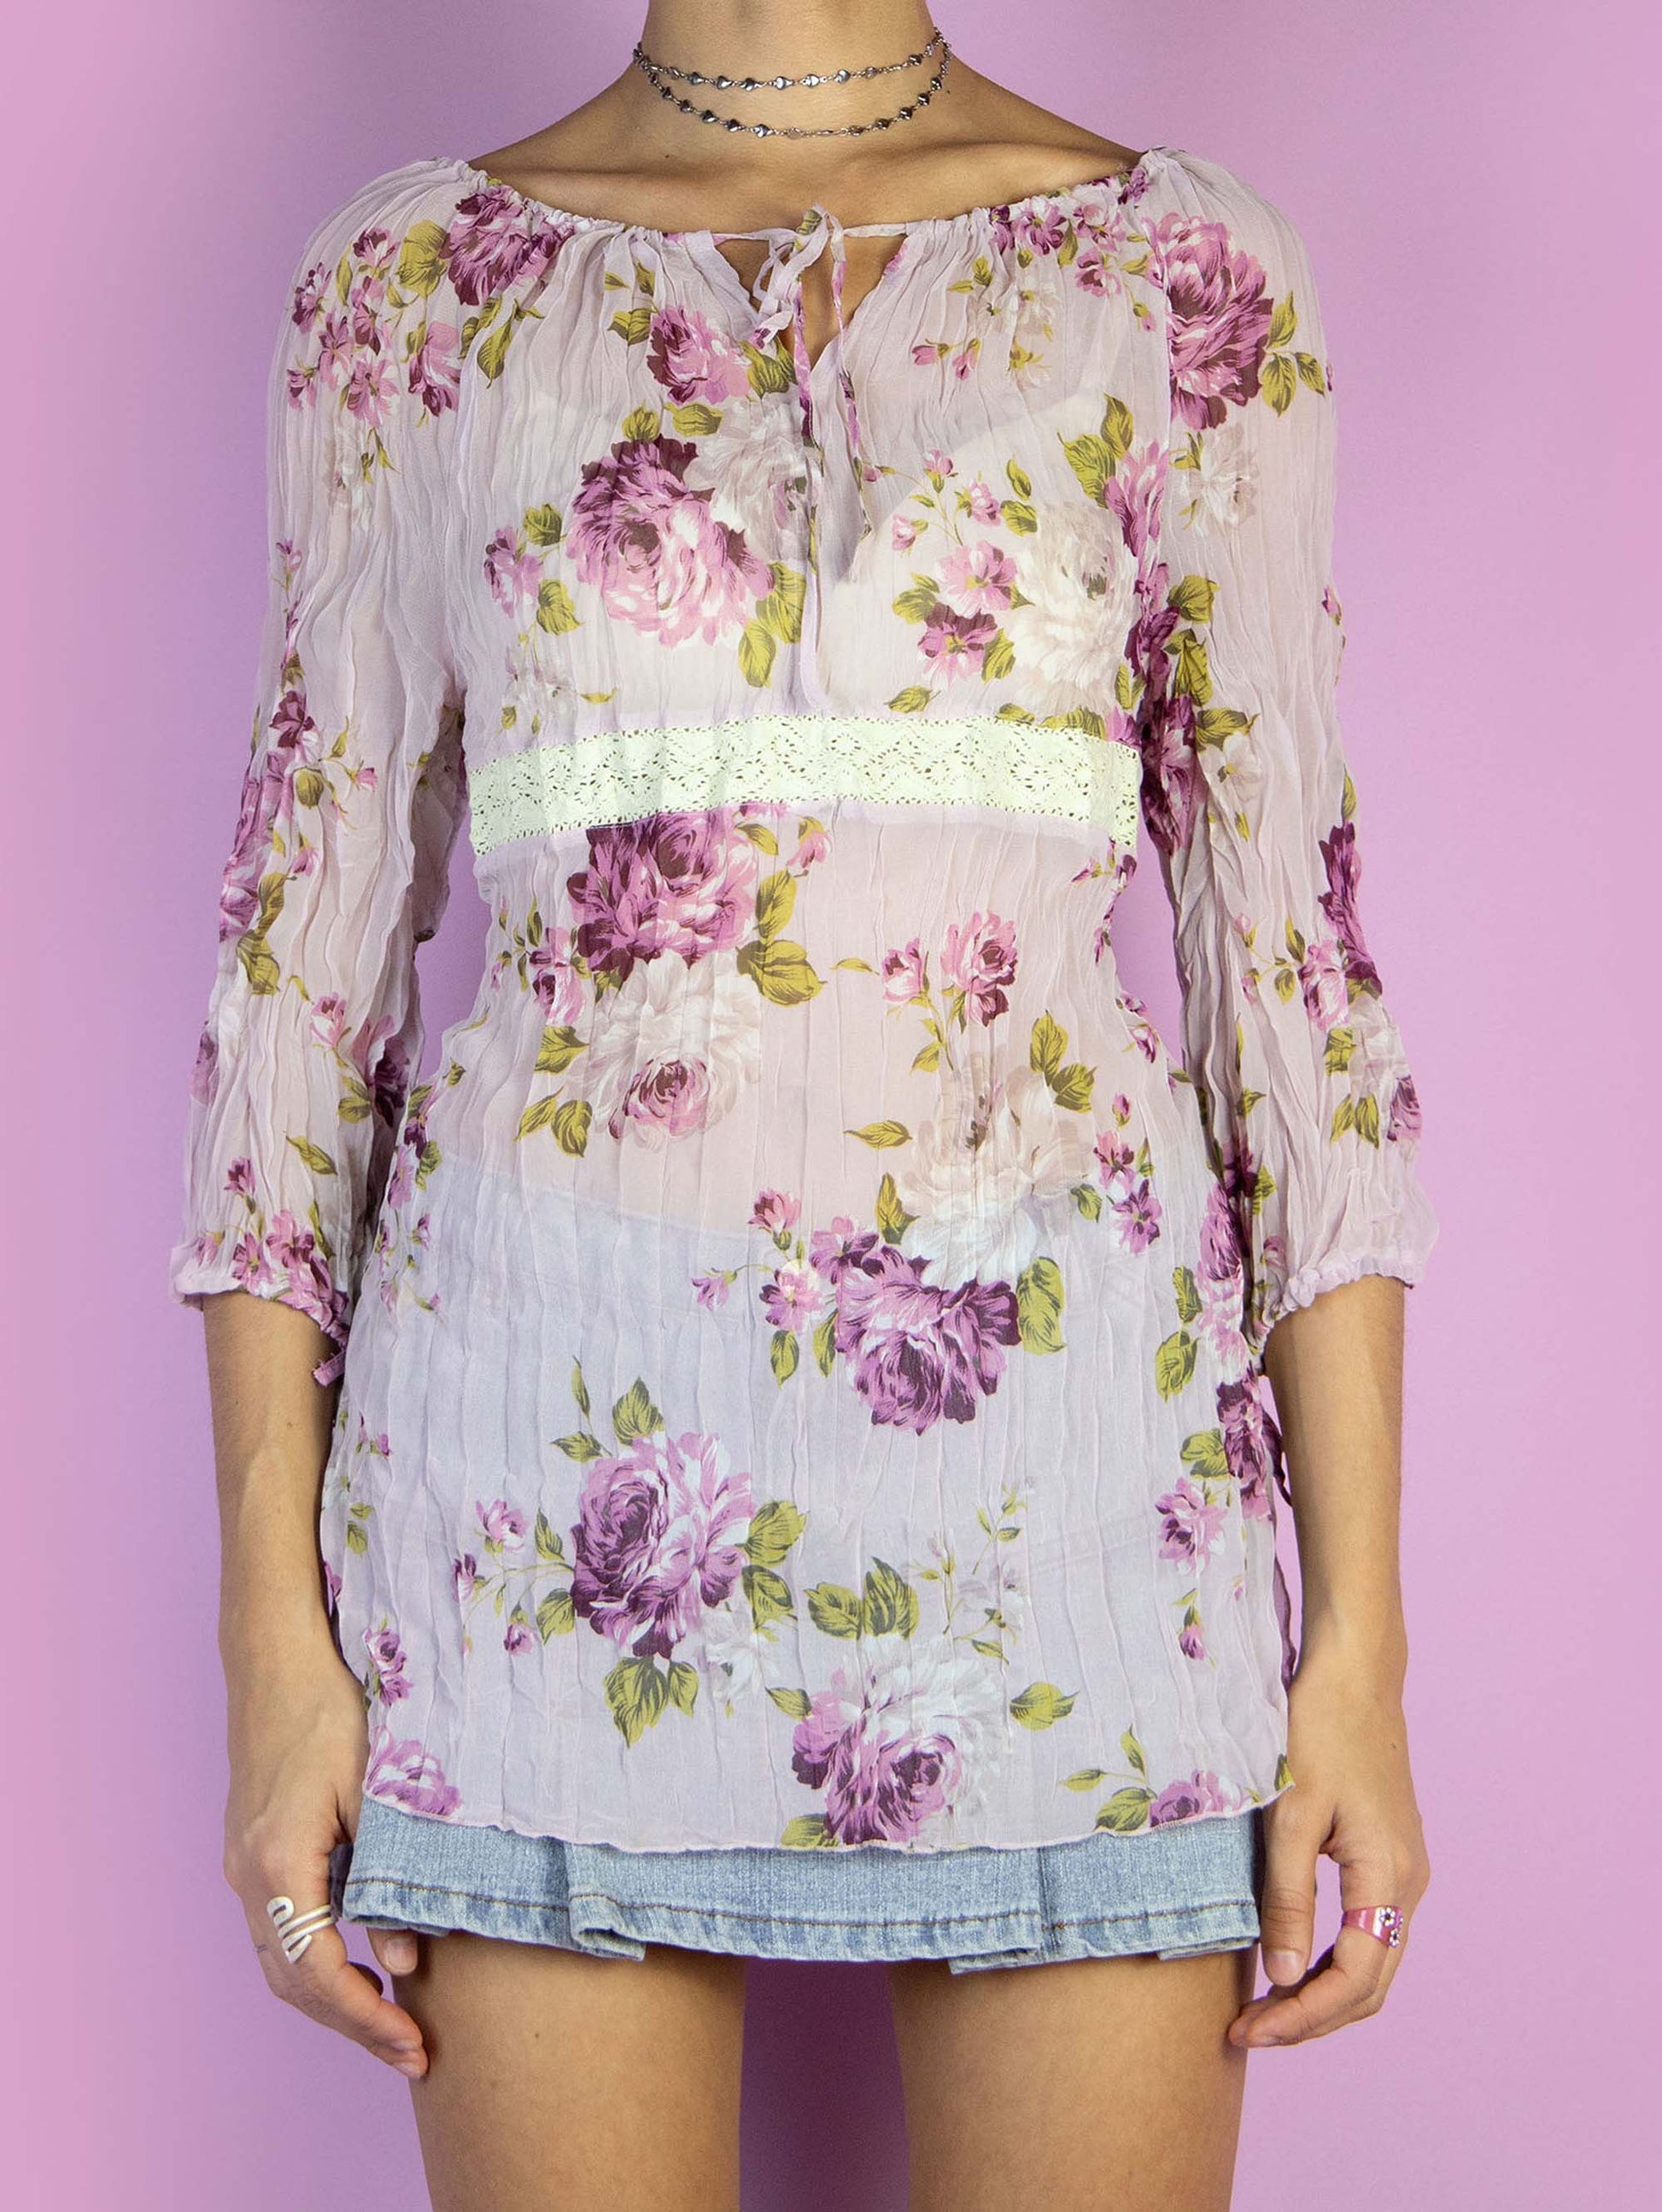 The Y2K Pink Floral Print Top is a vintage 2000s boho summer style semi-sheer blouse with half sleeves, and a tied neckline in the front.